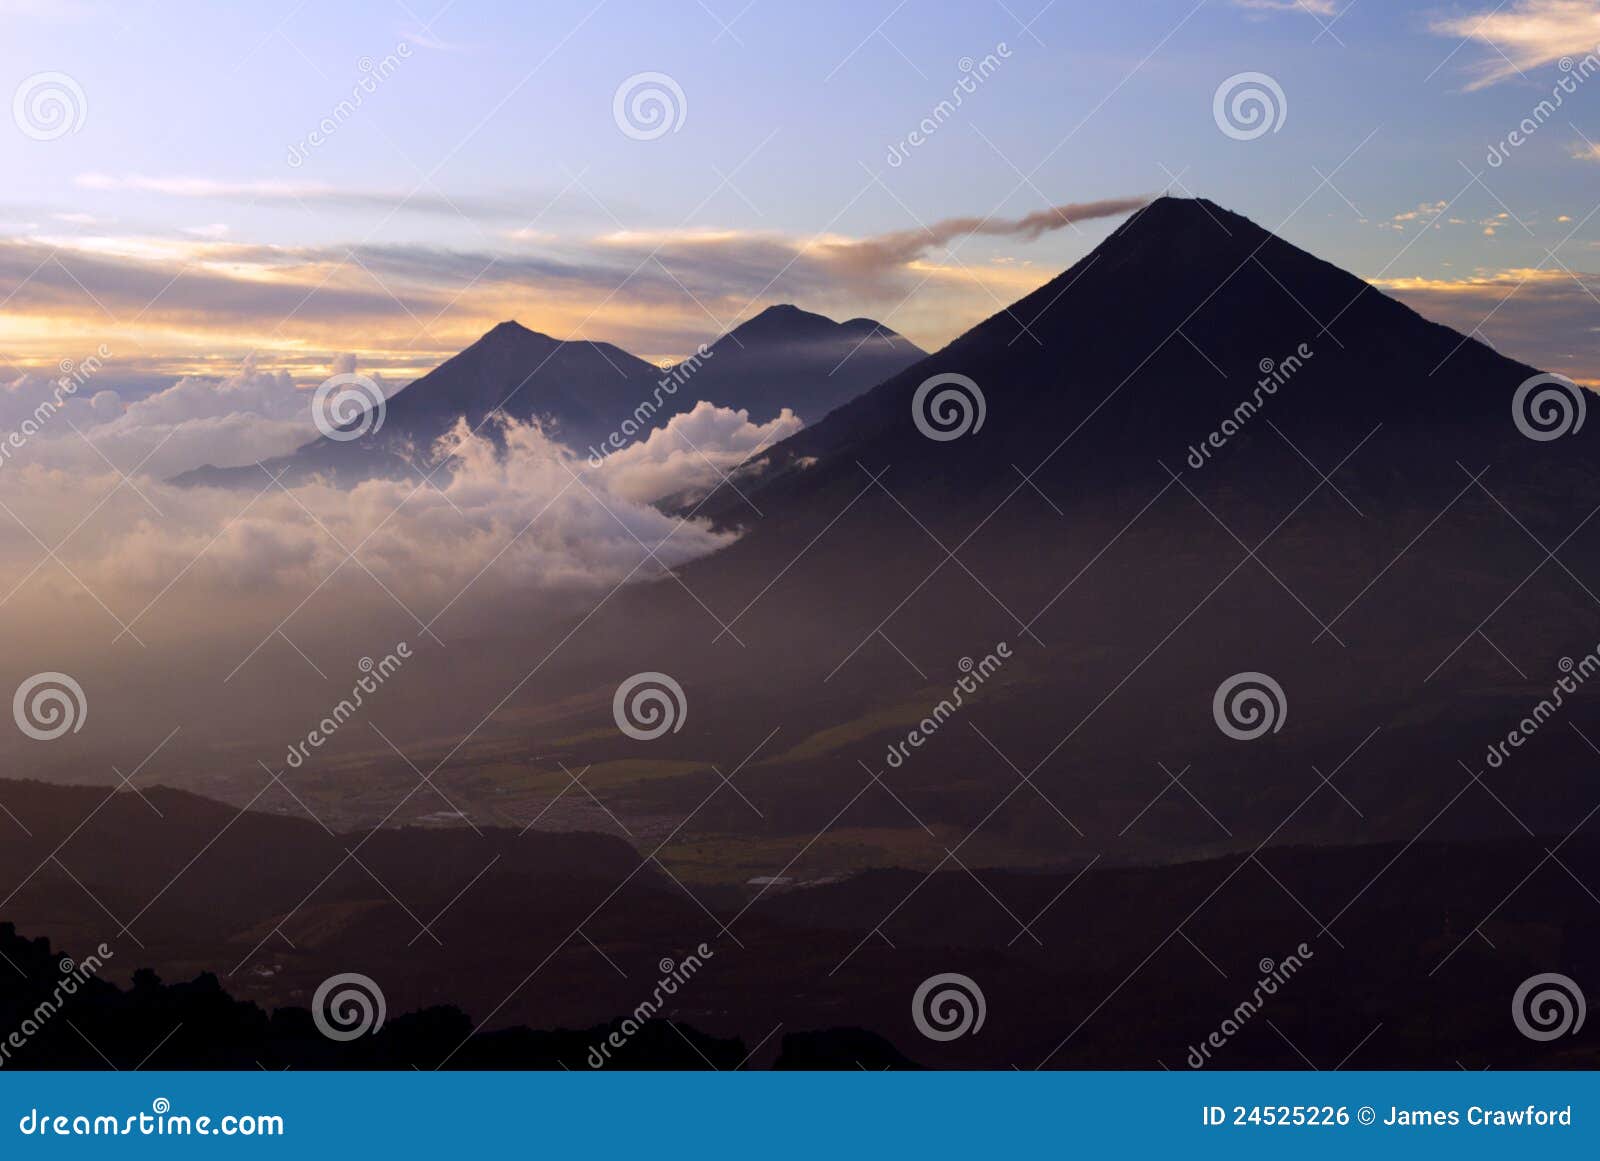 volcan acatenango and volcan fuego at sunset